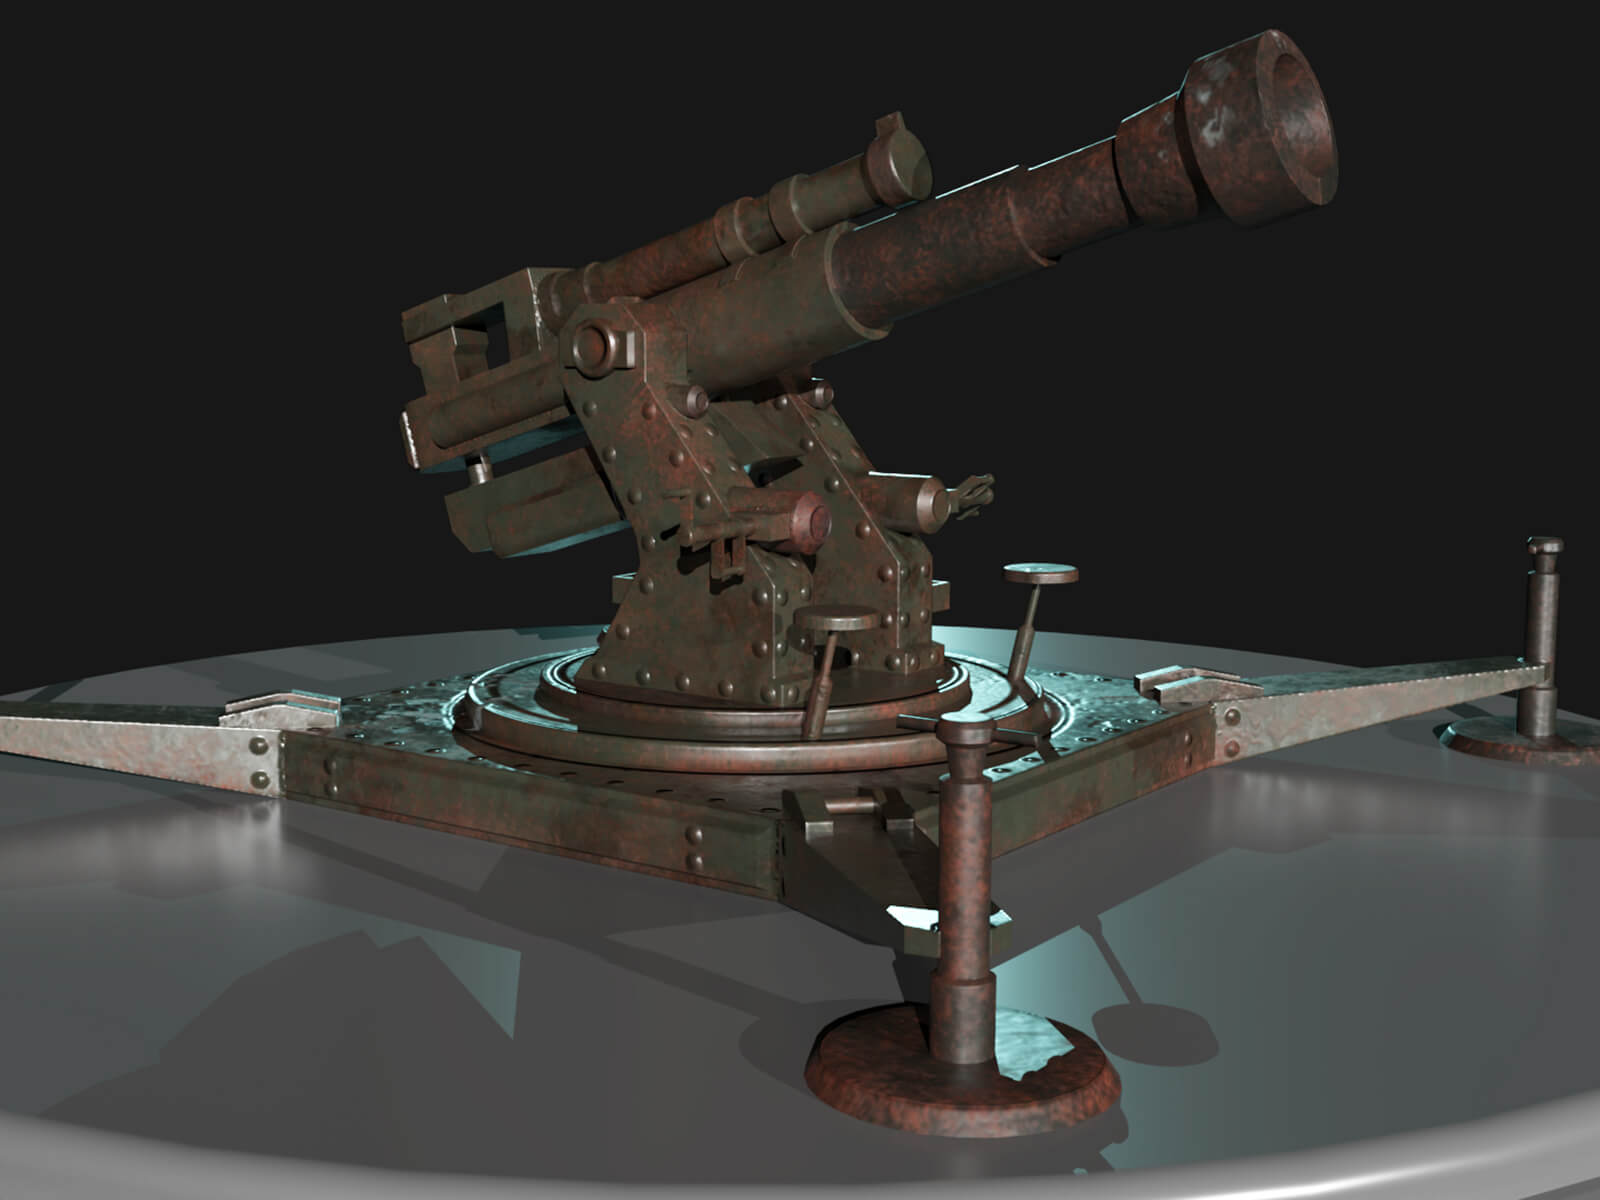 A large weapon on a turntable